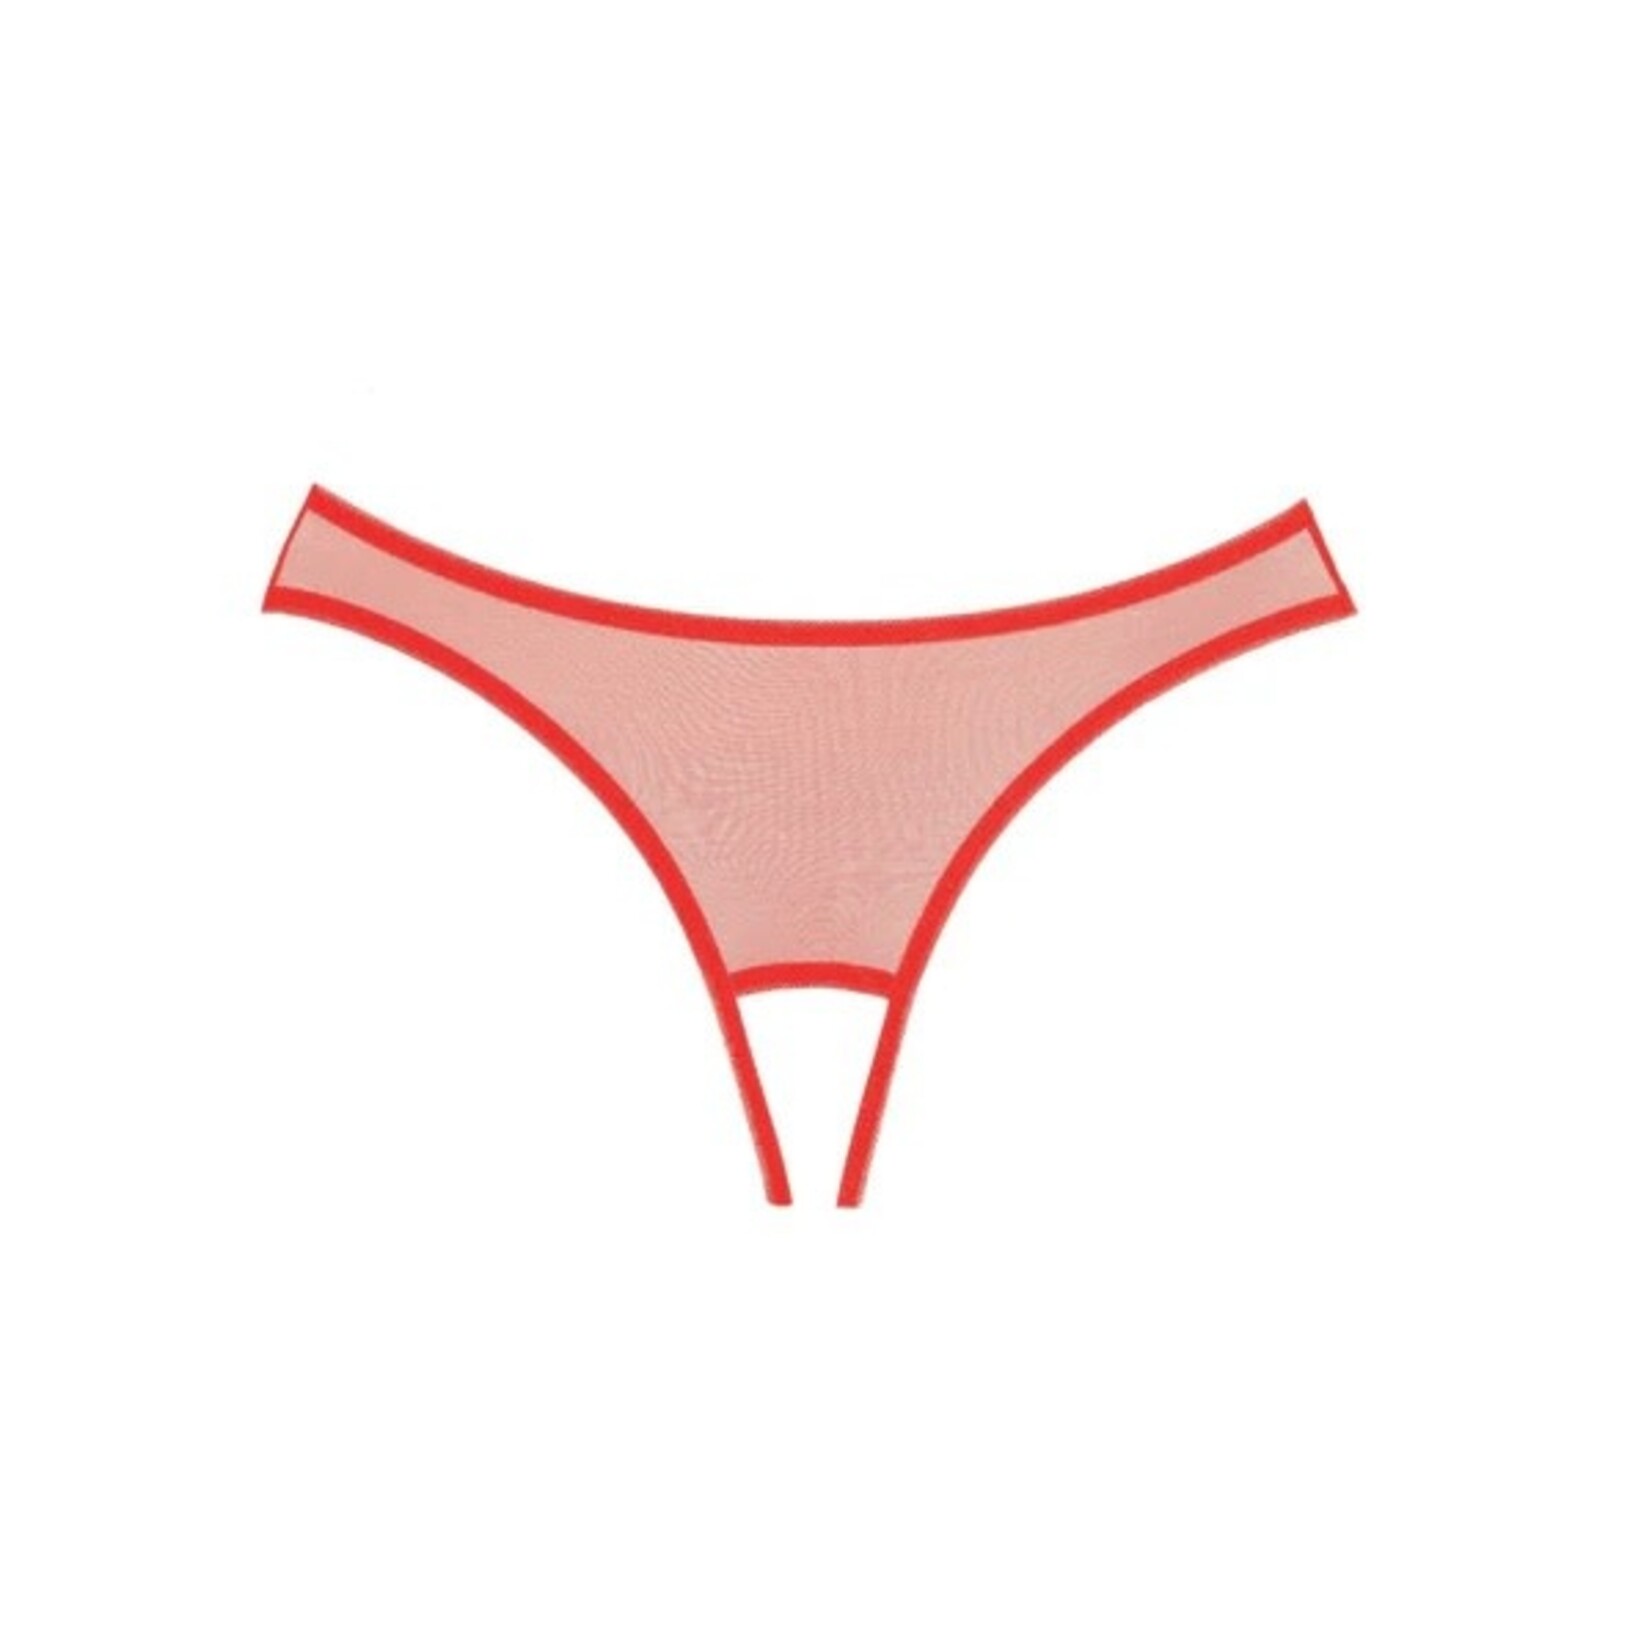 ALLURE LINGERIE ALLURE ADORE - EXPOSE RED PANTY - O/S